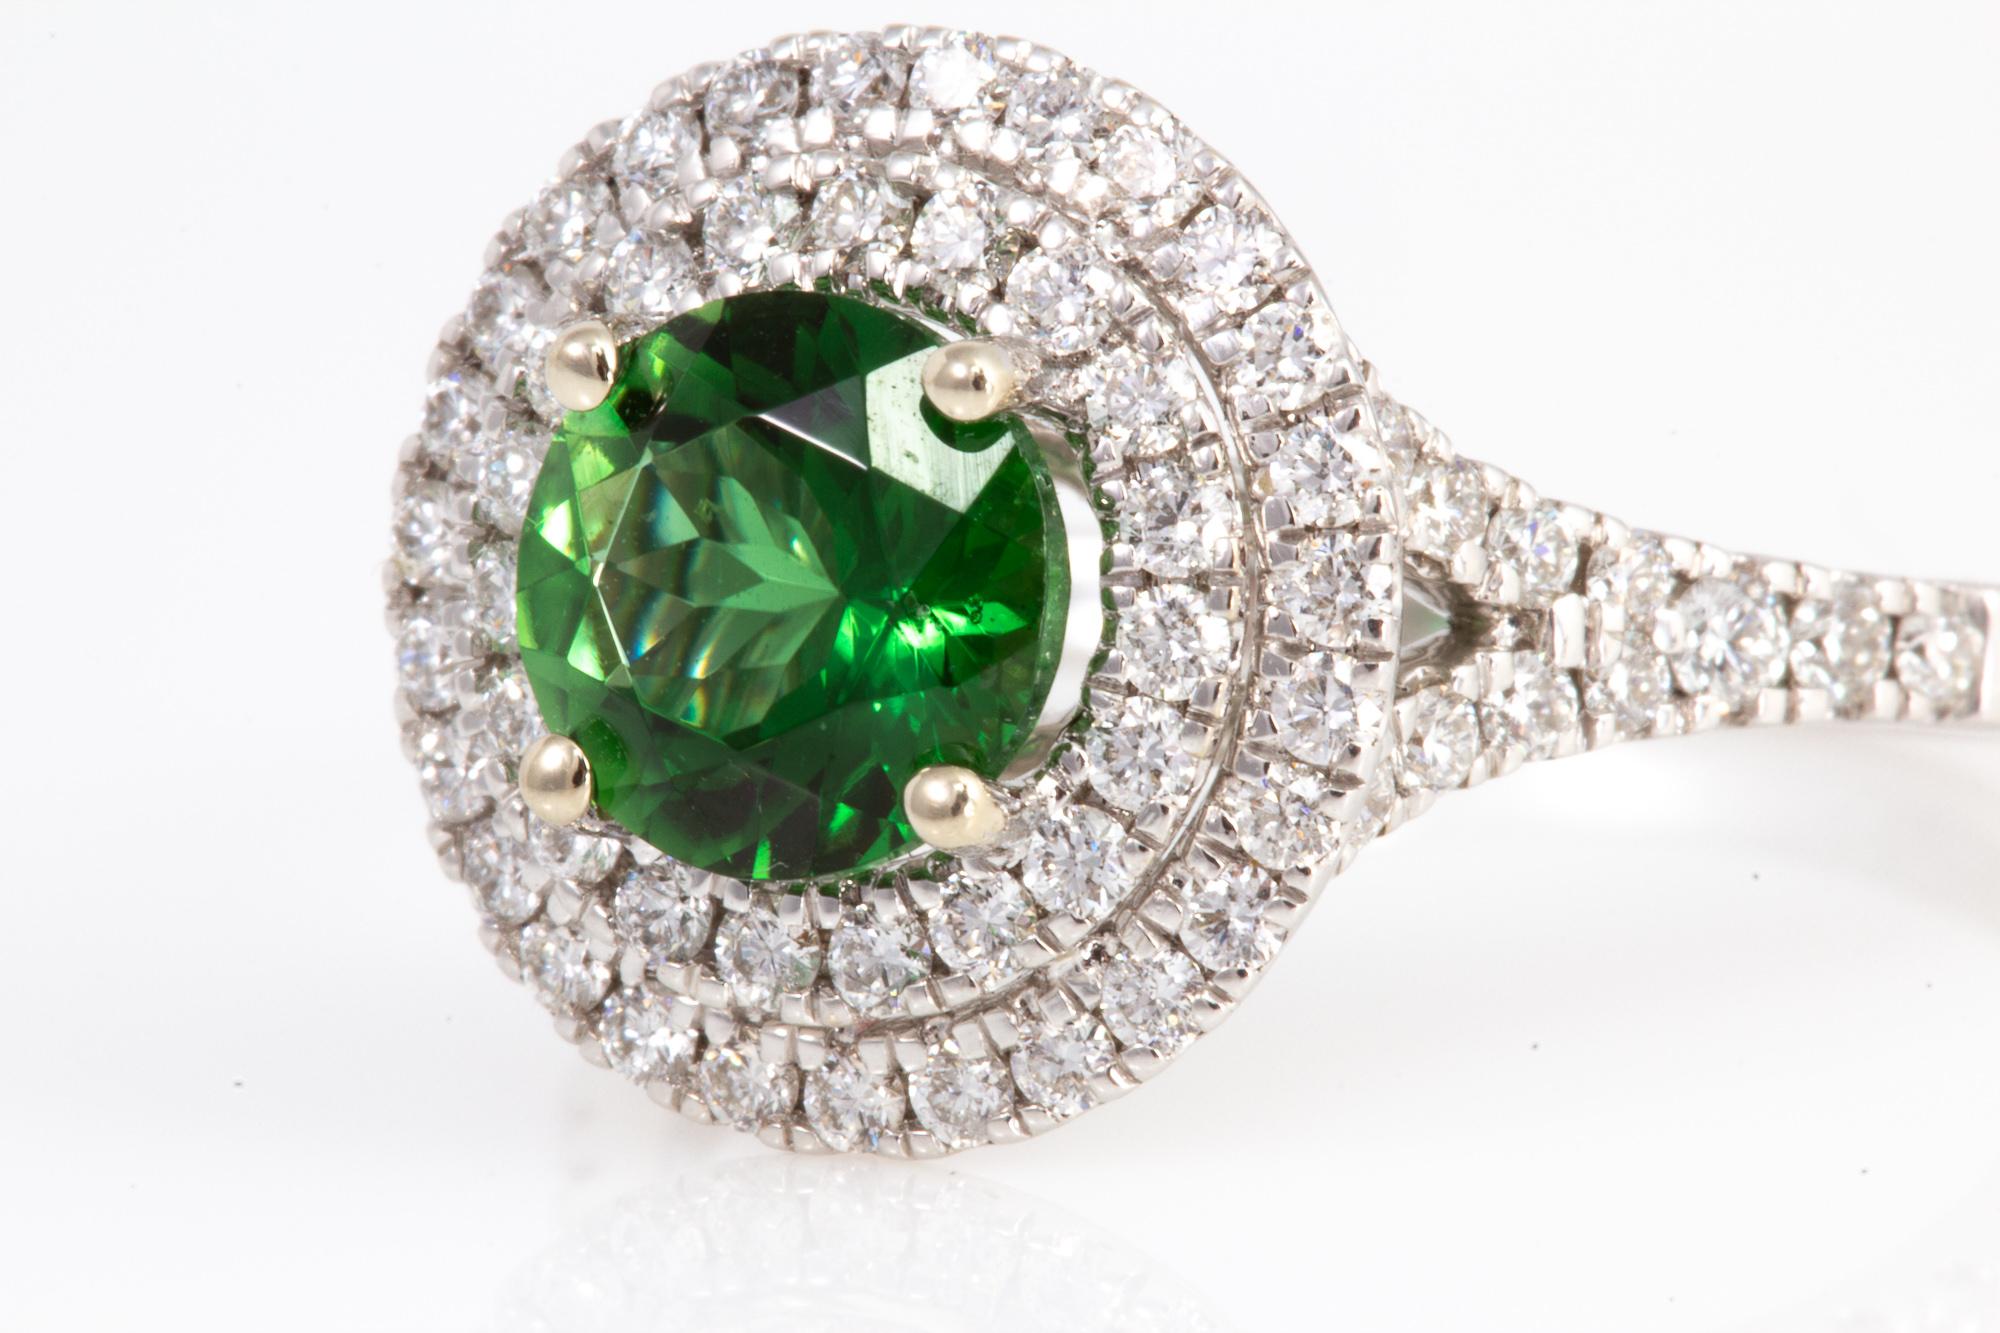 Exceptionally Well Cut 1.26 Carat Chrome Tourmaline and Diamond Ring For Sale 5